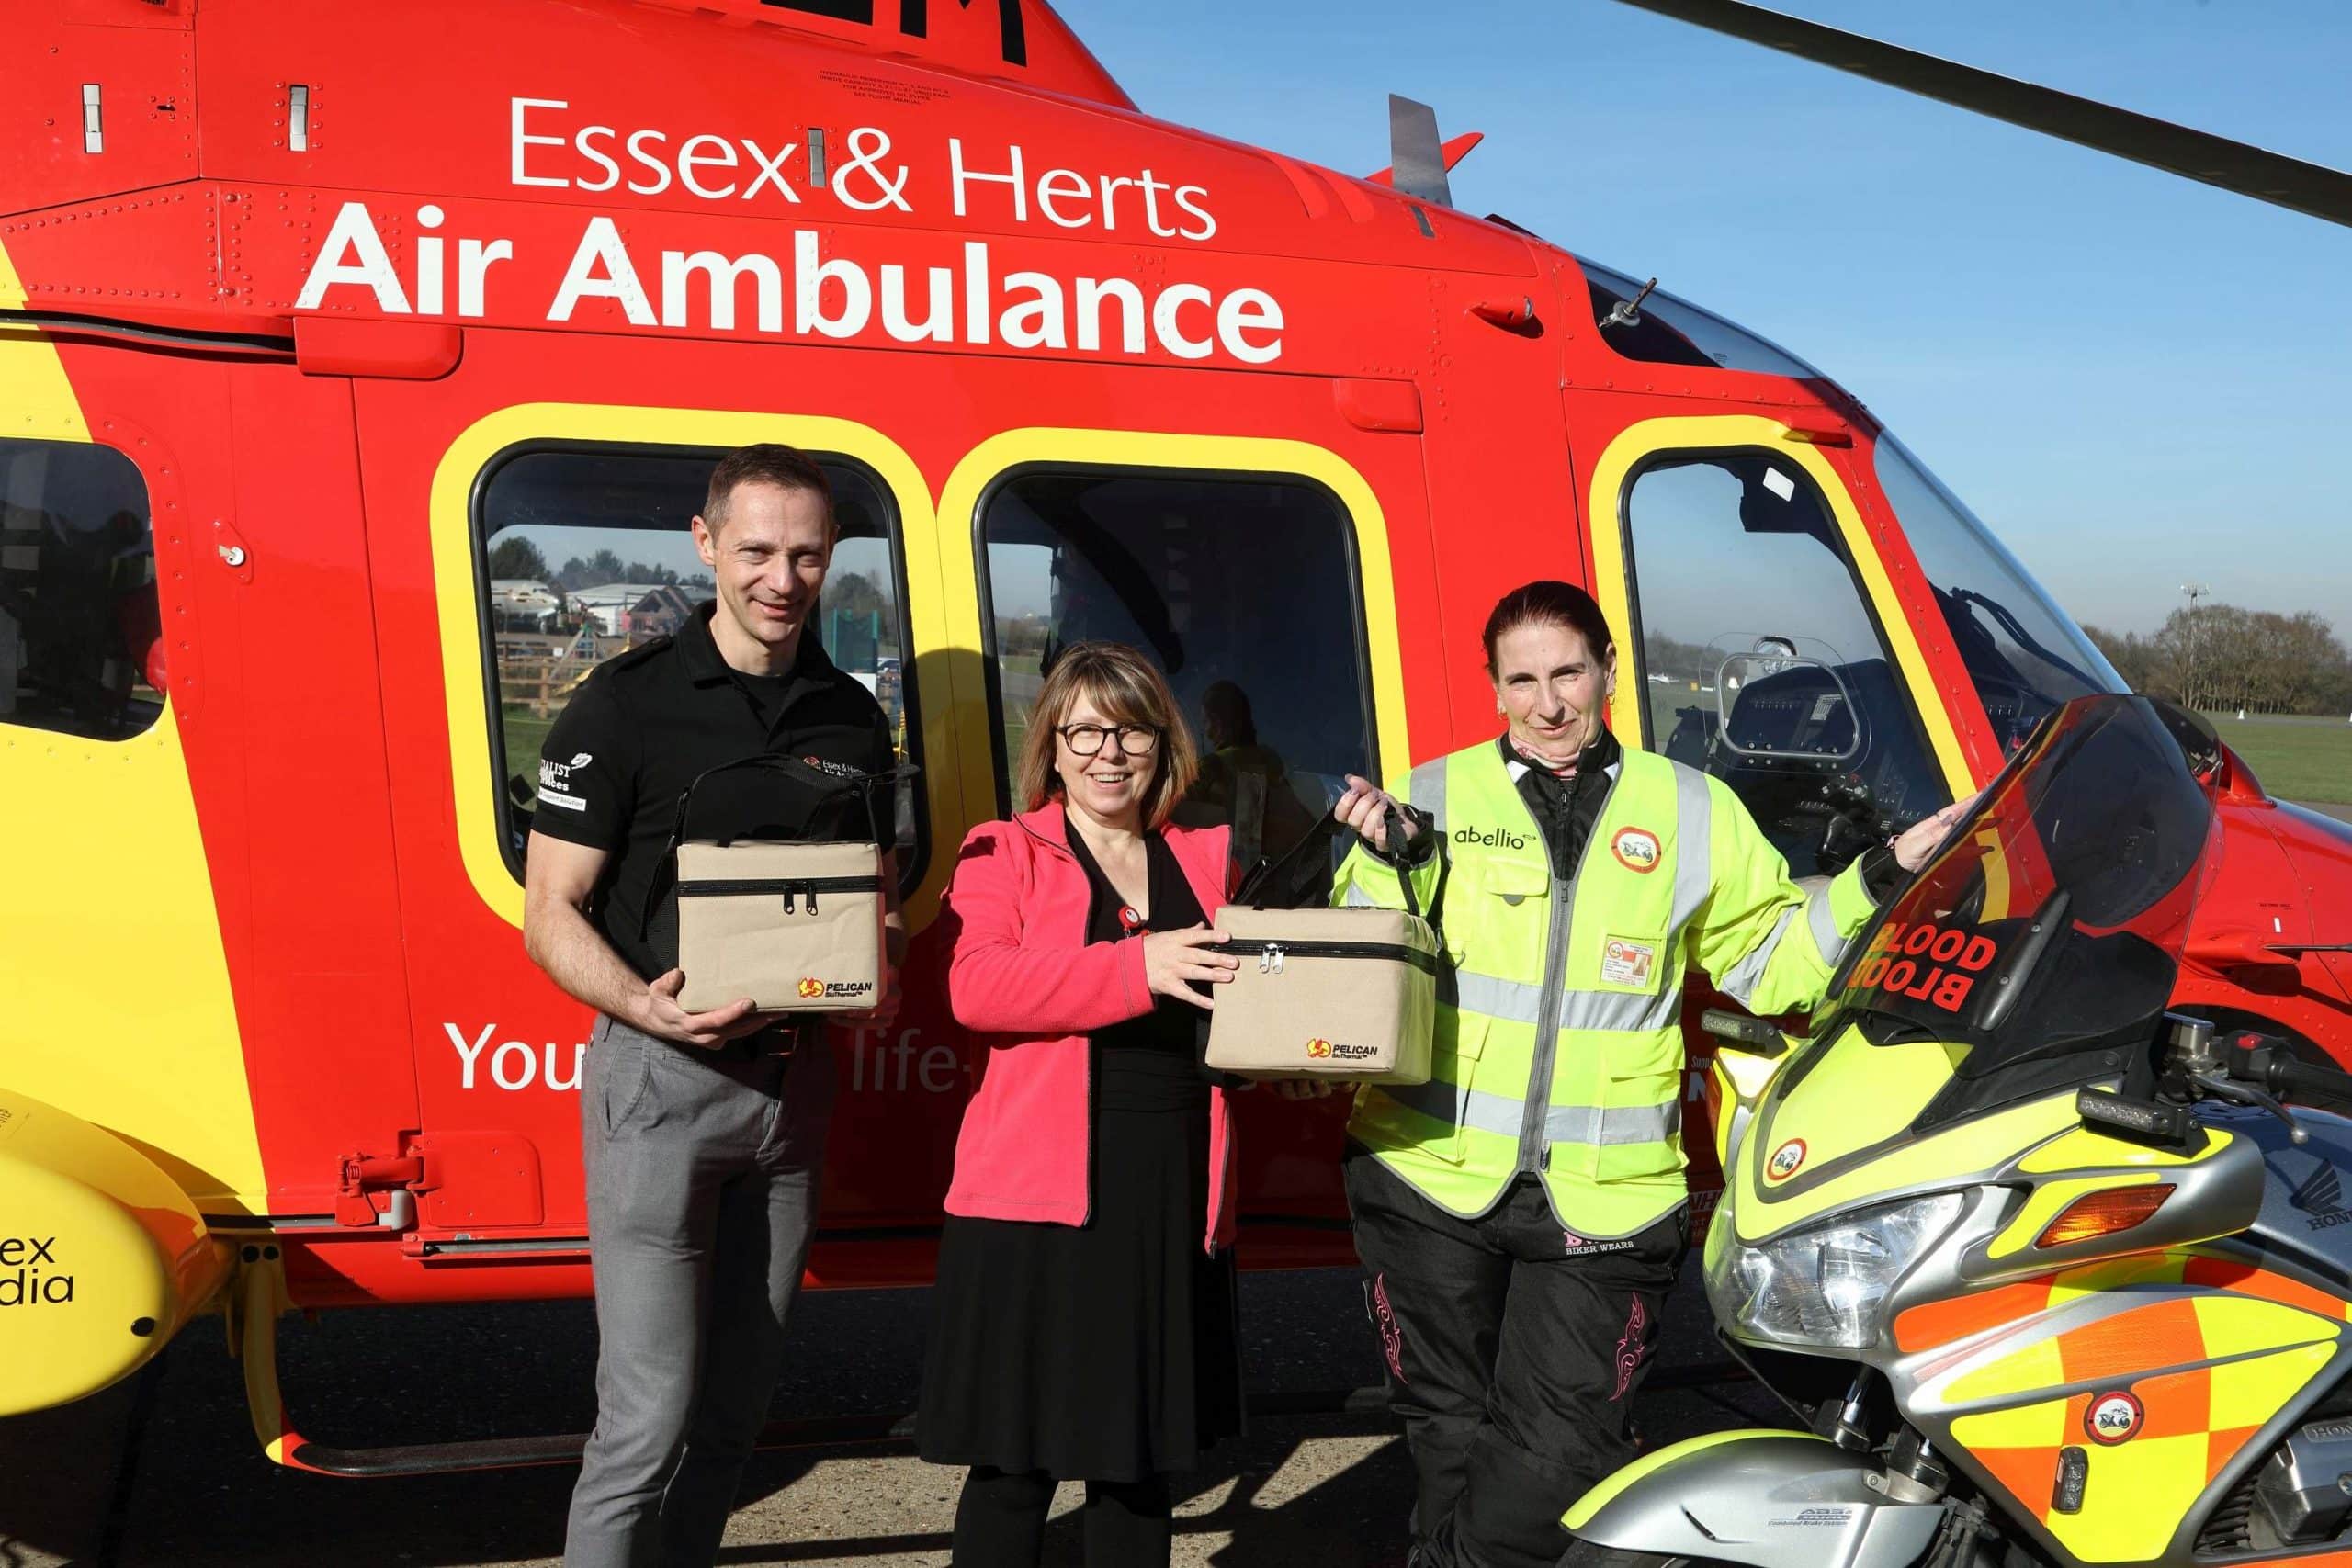 Essex & Herts Air Ambulance to carry blood supplies